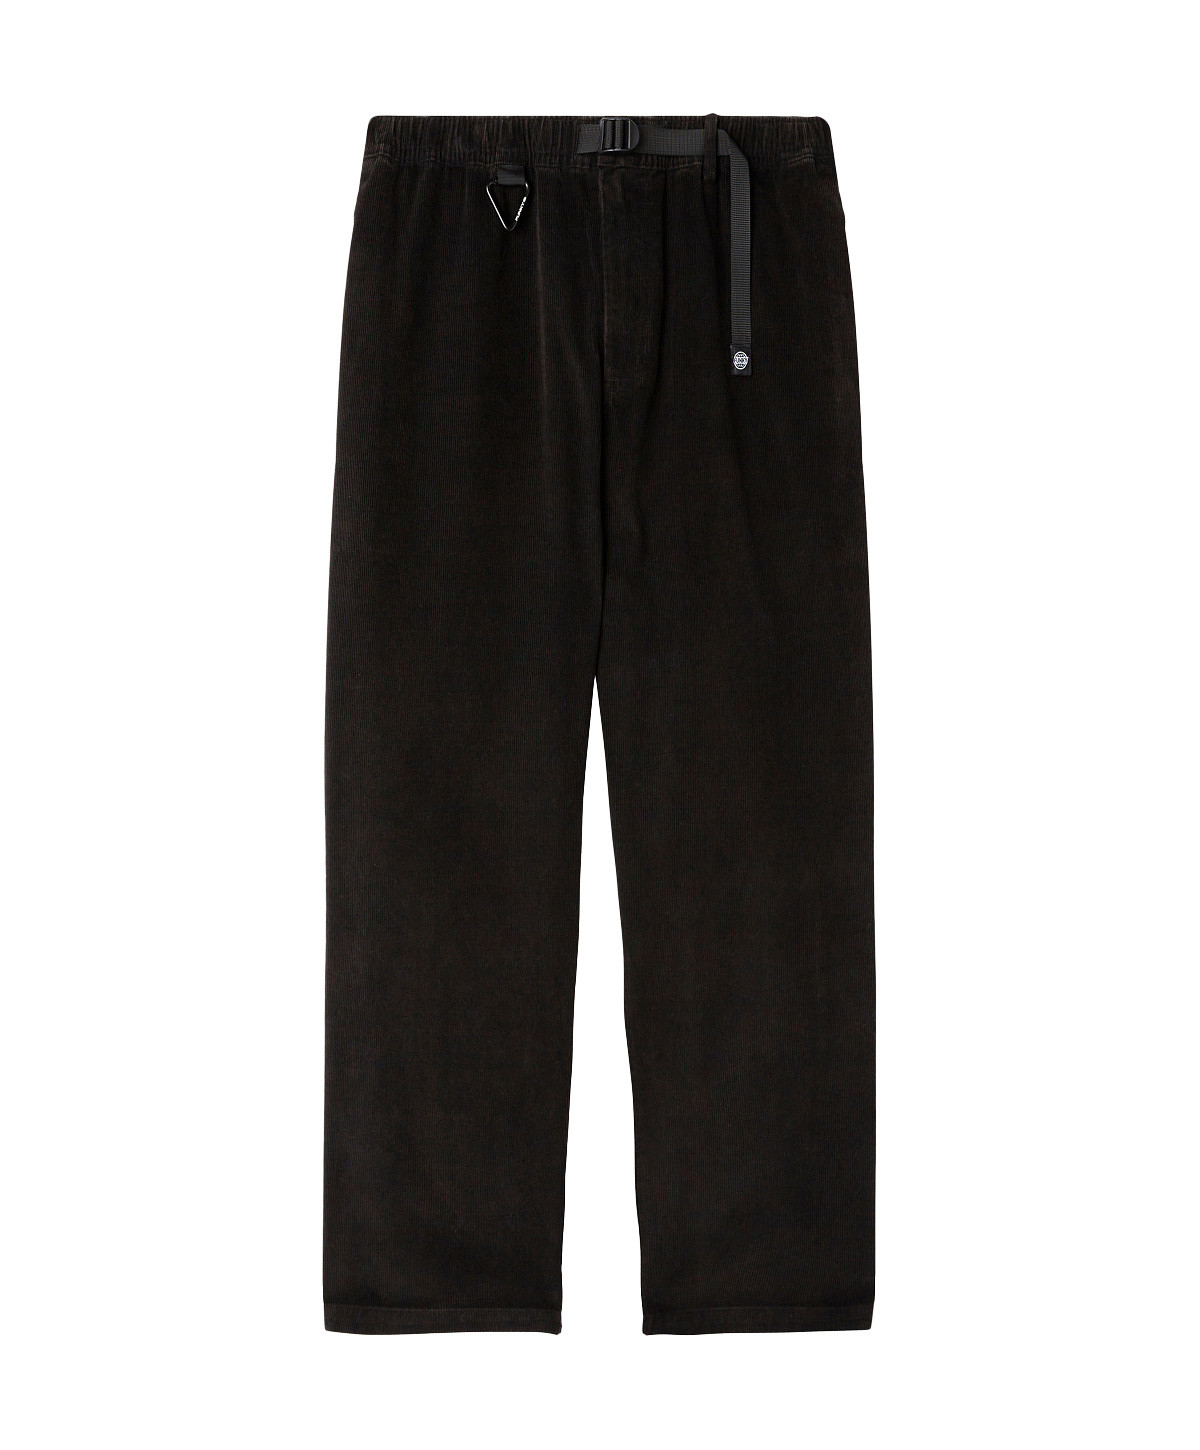 Funky - Corduroy trousers, Black, large image number 0